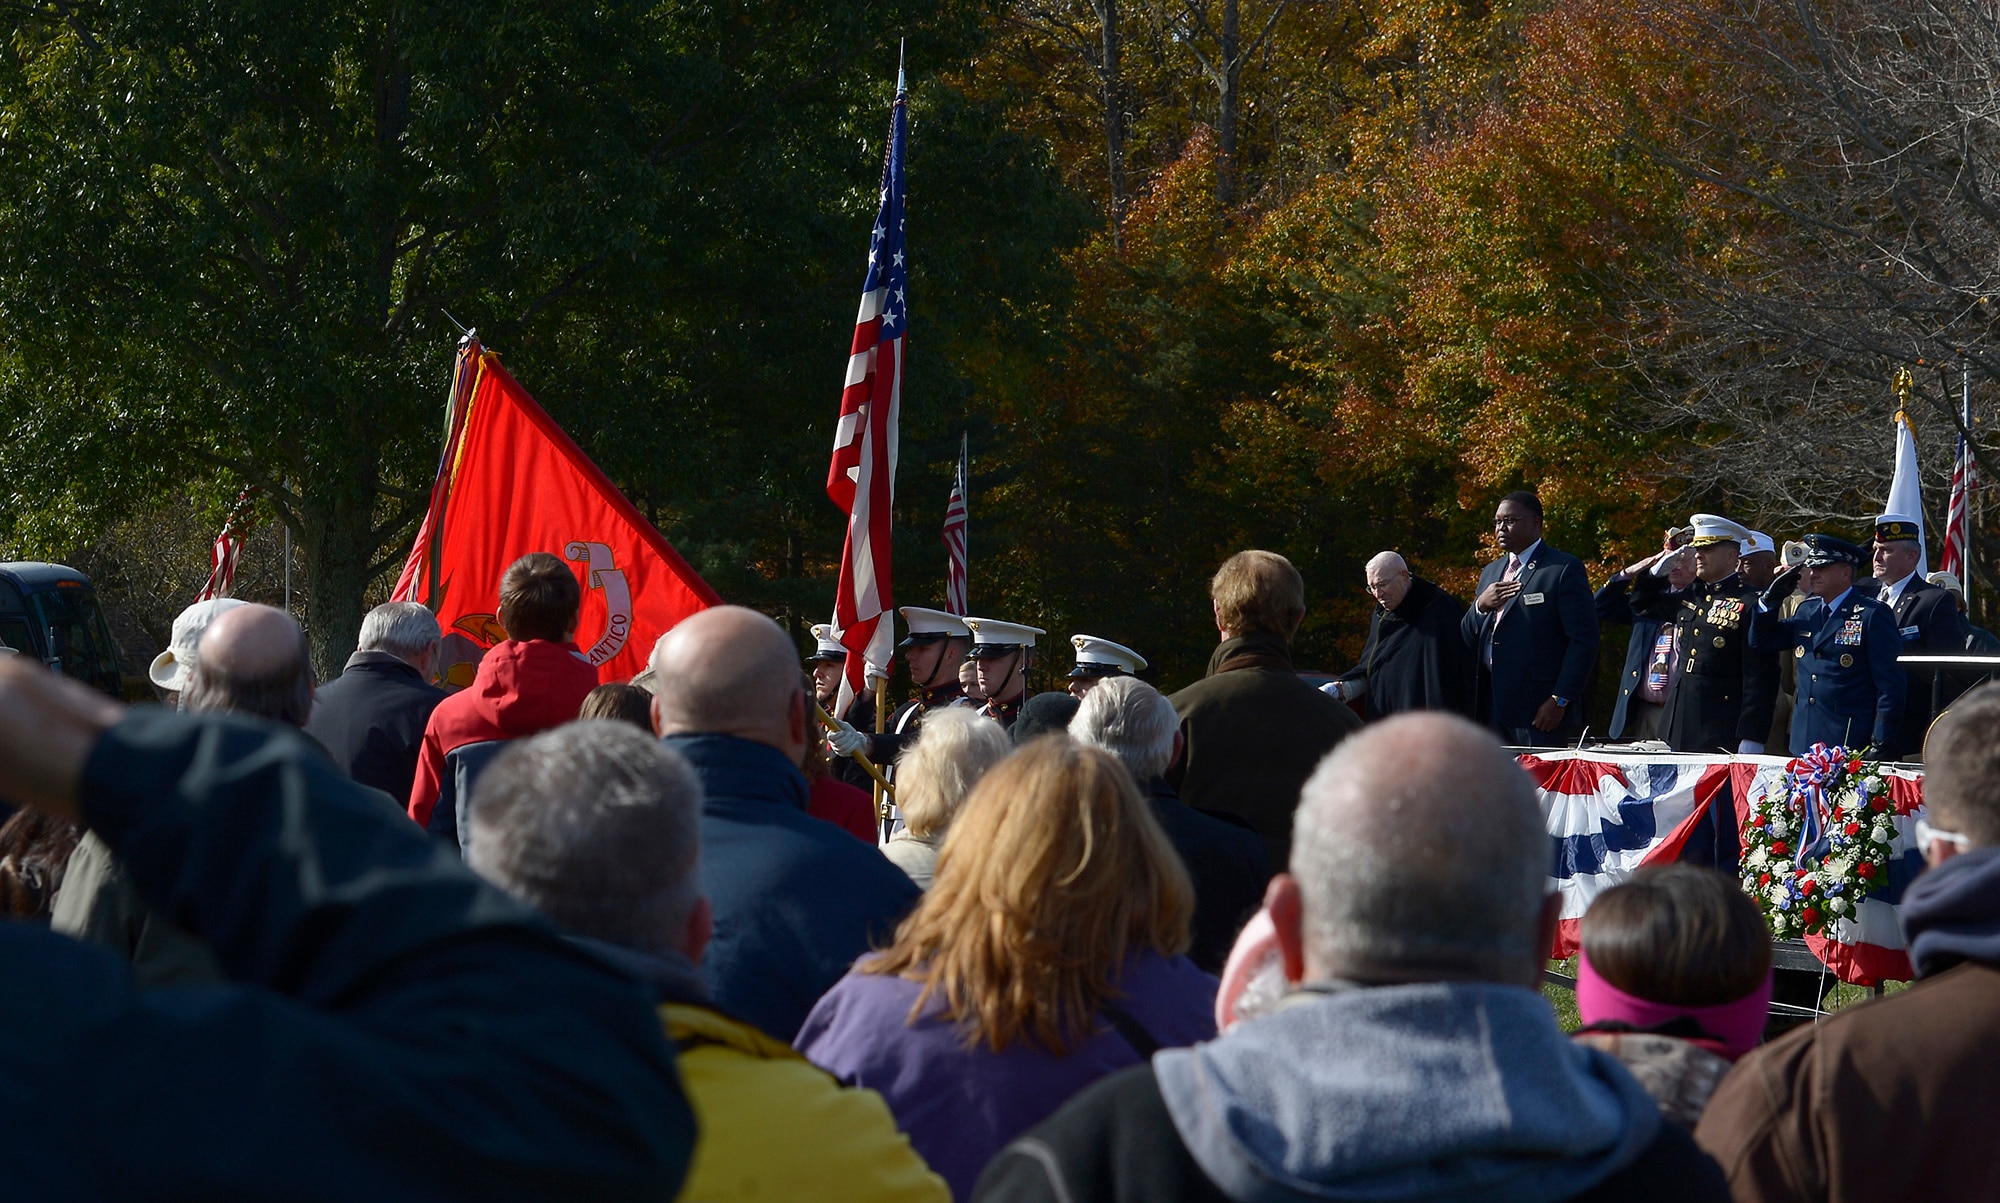 Members of a color guard from Quantico Marine Corps Base present the colors during a Veterans Day ceremony at Quantico National Cemetery in Quantico, Va., Nov. 11, 2017. The Veterans Day ceremony is an annual event hosted by the Potomac Region Veterans Council. The event featured a performance by the Quantico Marine Corps Band. (U.S. Air Force photo by Tech. Sgt. Dan DeCook)